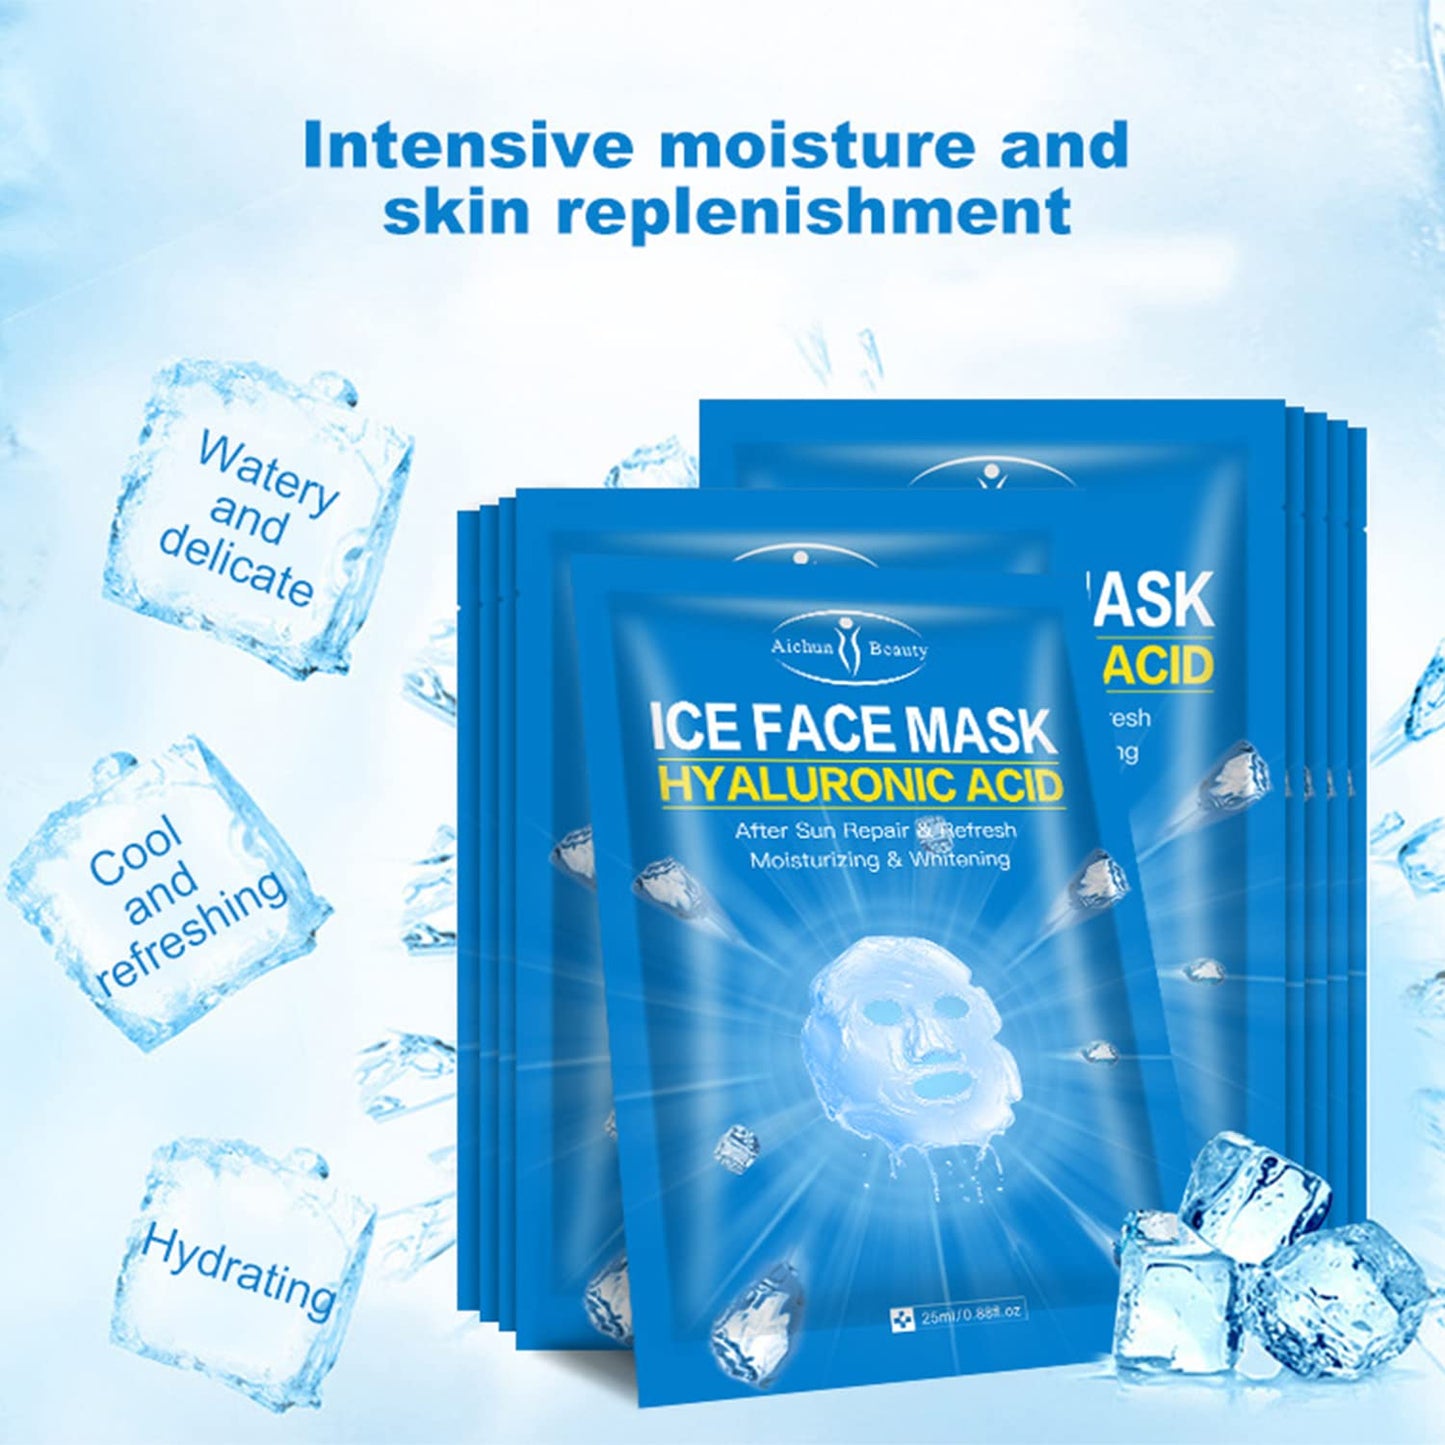 AICHUN BEAUTY Ice Face Mask Hyaluronic Acid After Sun Repair Refresh Moisturizing Relieves Pain Acne Scars Facial Skin Care 25ml / 0.88fl.oz (10 Pack)